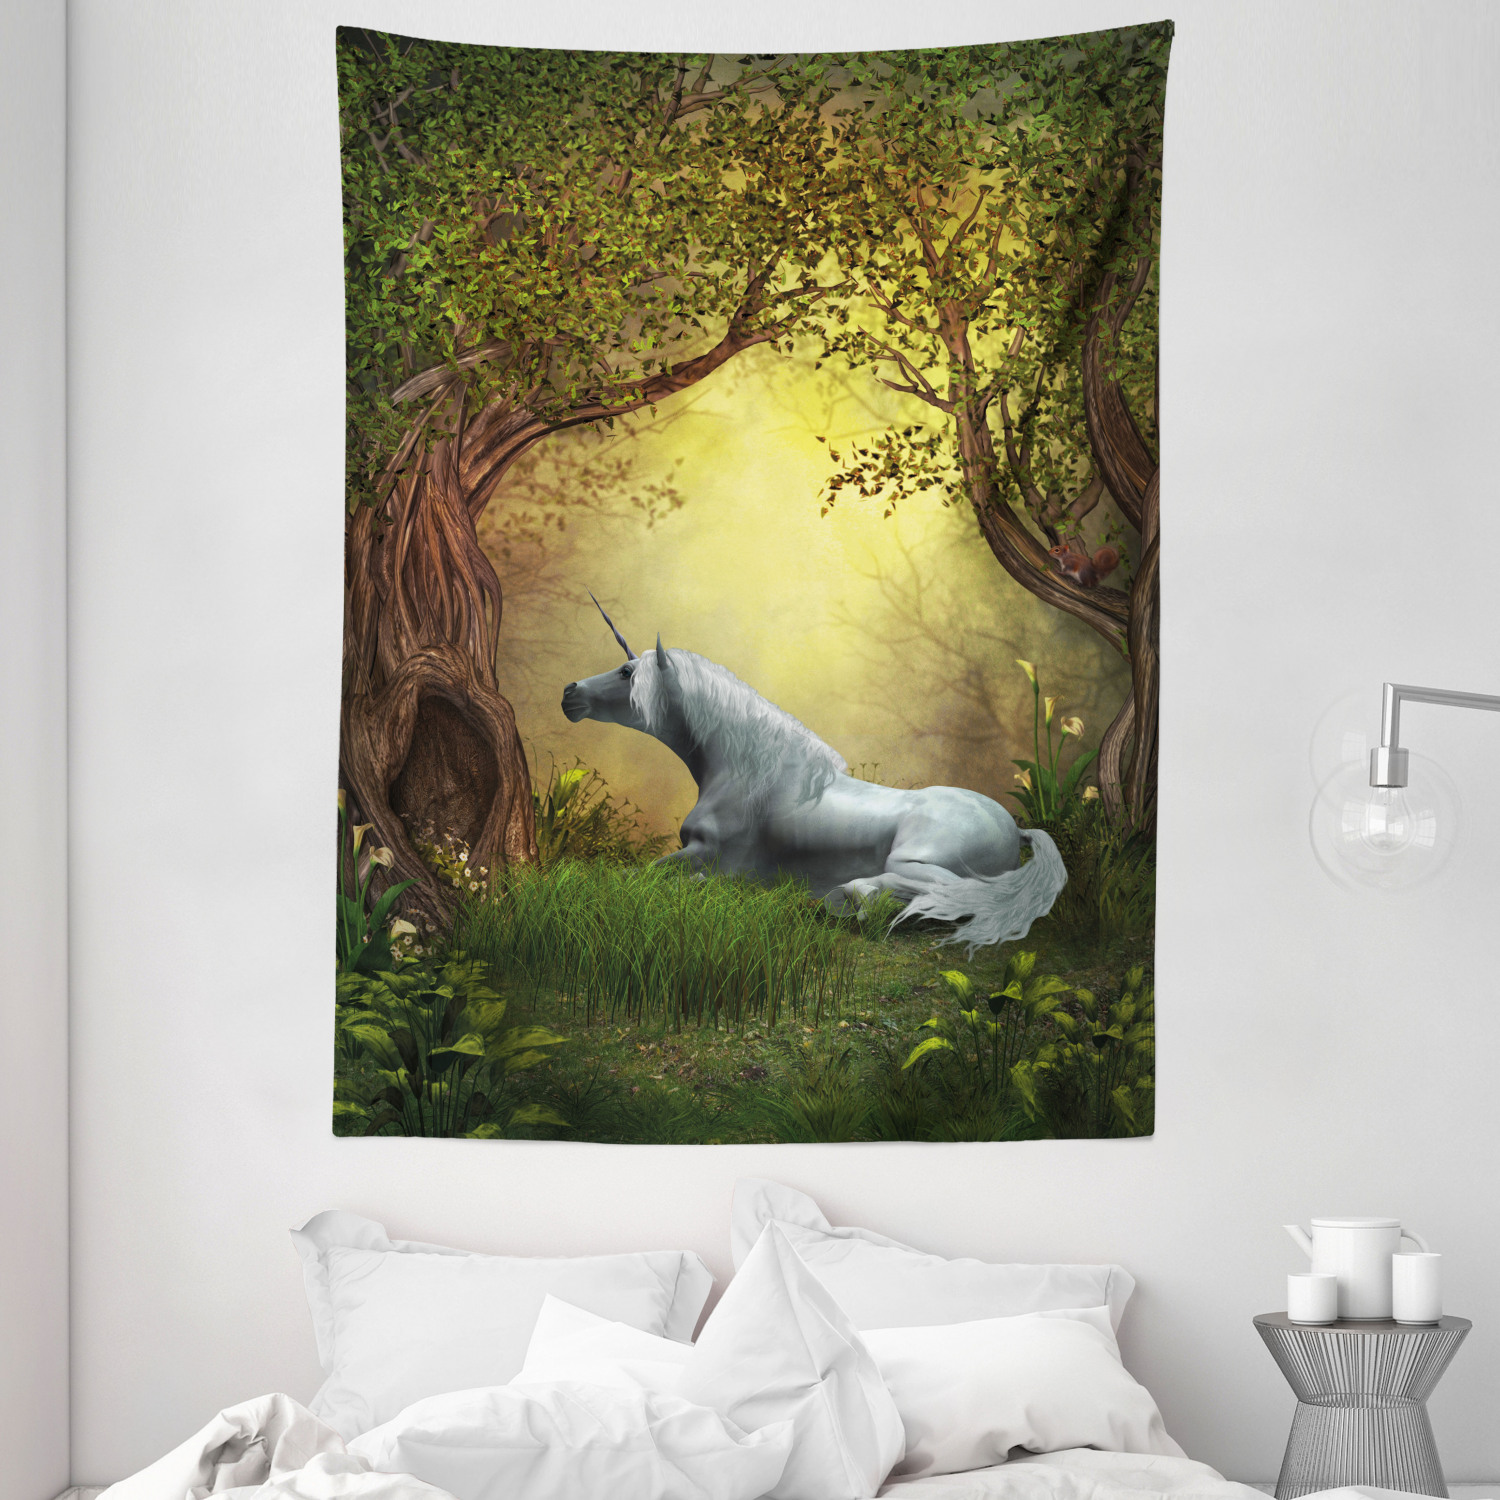 Unicorn Tapestry Magical Fantasy Forest Print Wall Hanging Decor eBay